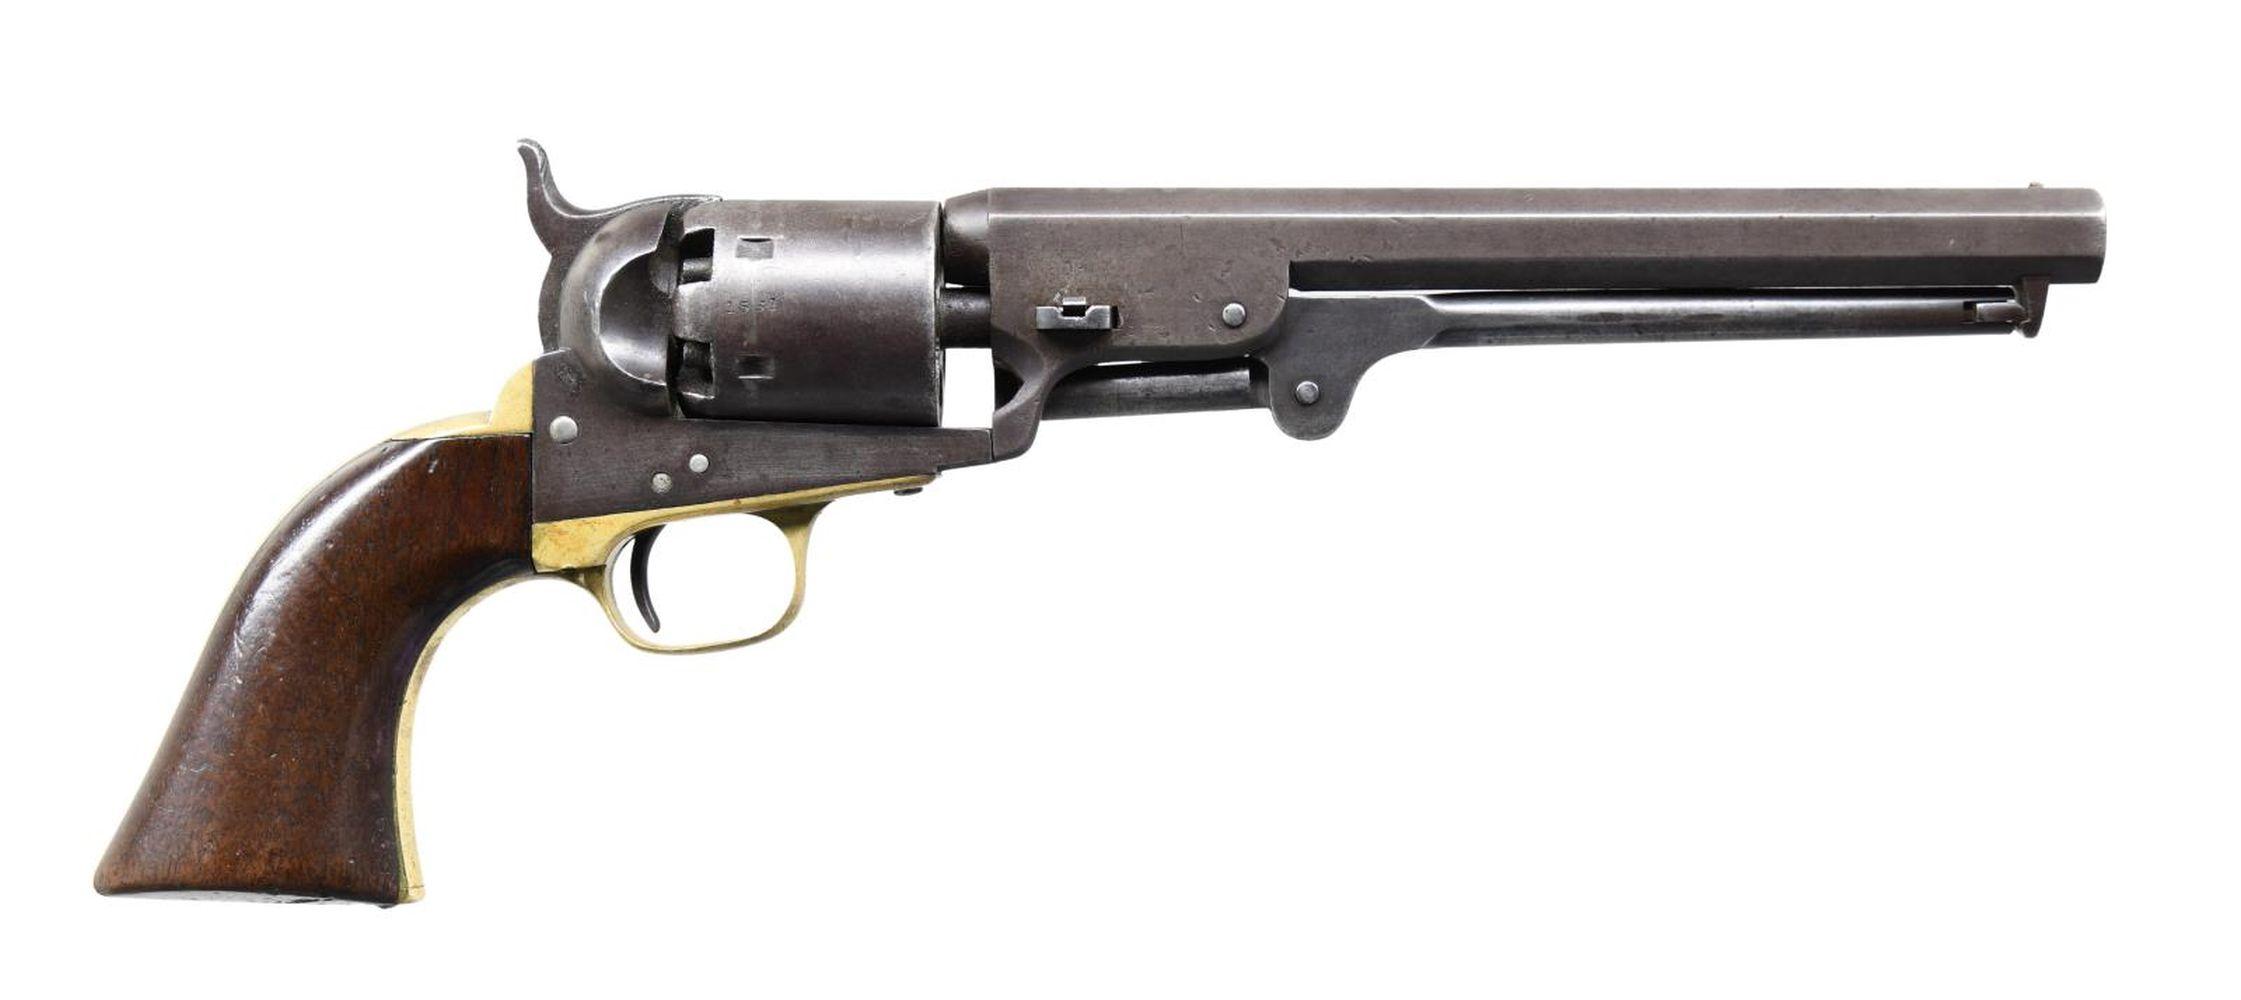 UNMARKED QUALITY PERIOD COPY OF A COLT MODEL 1851